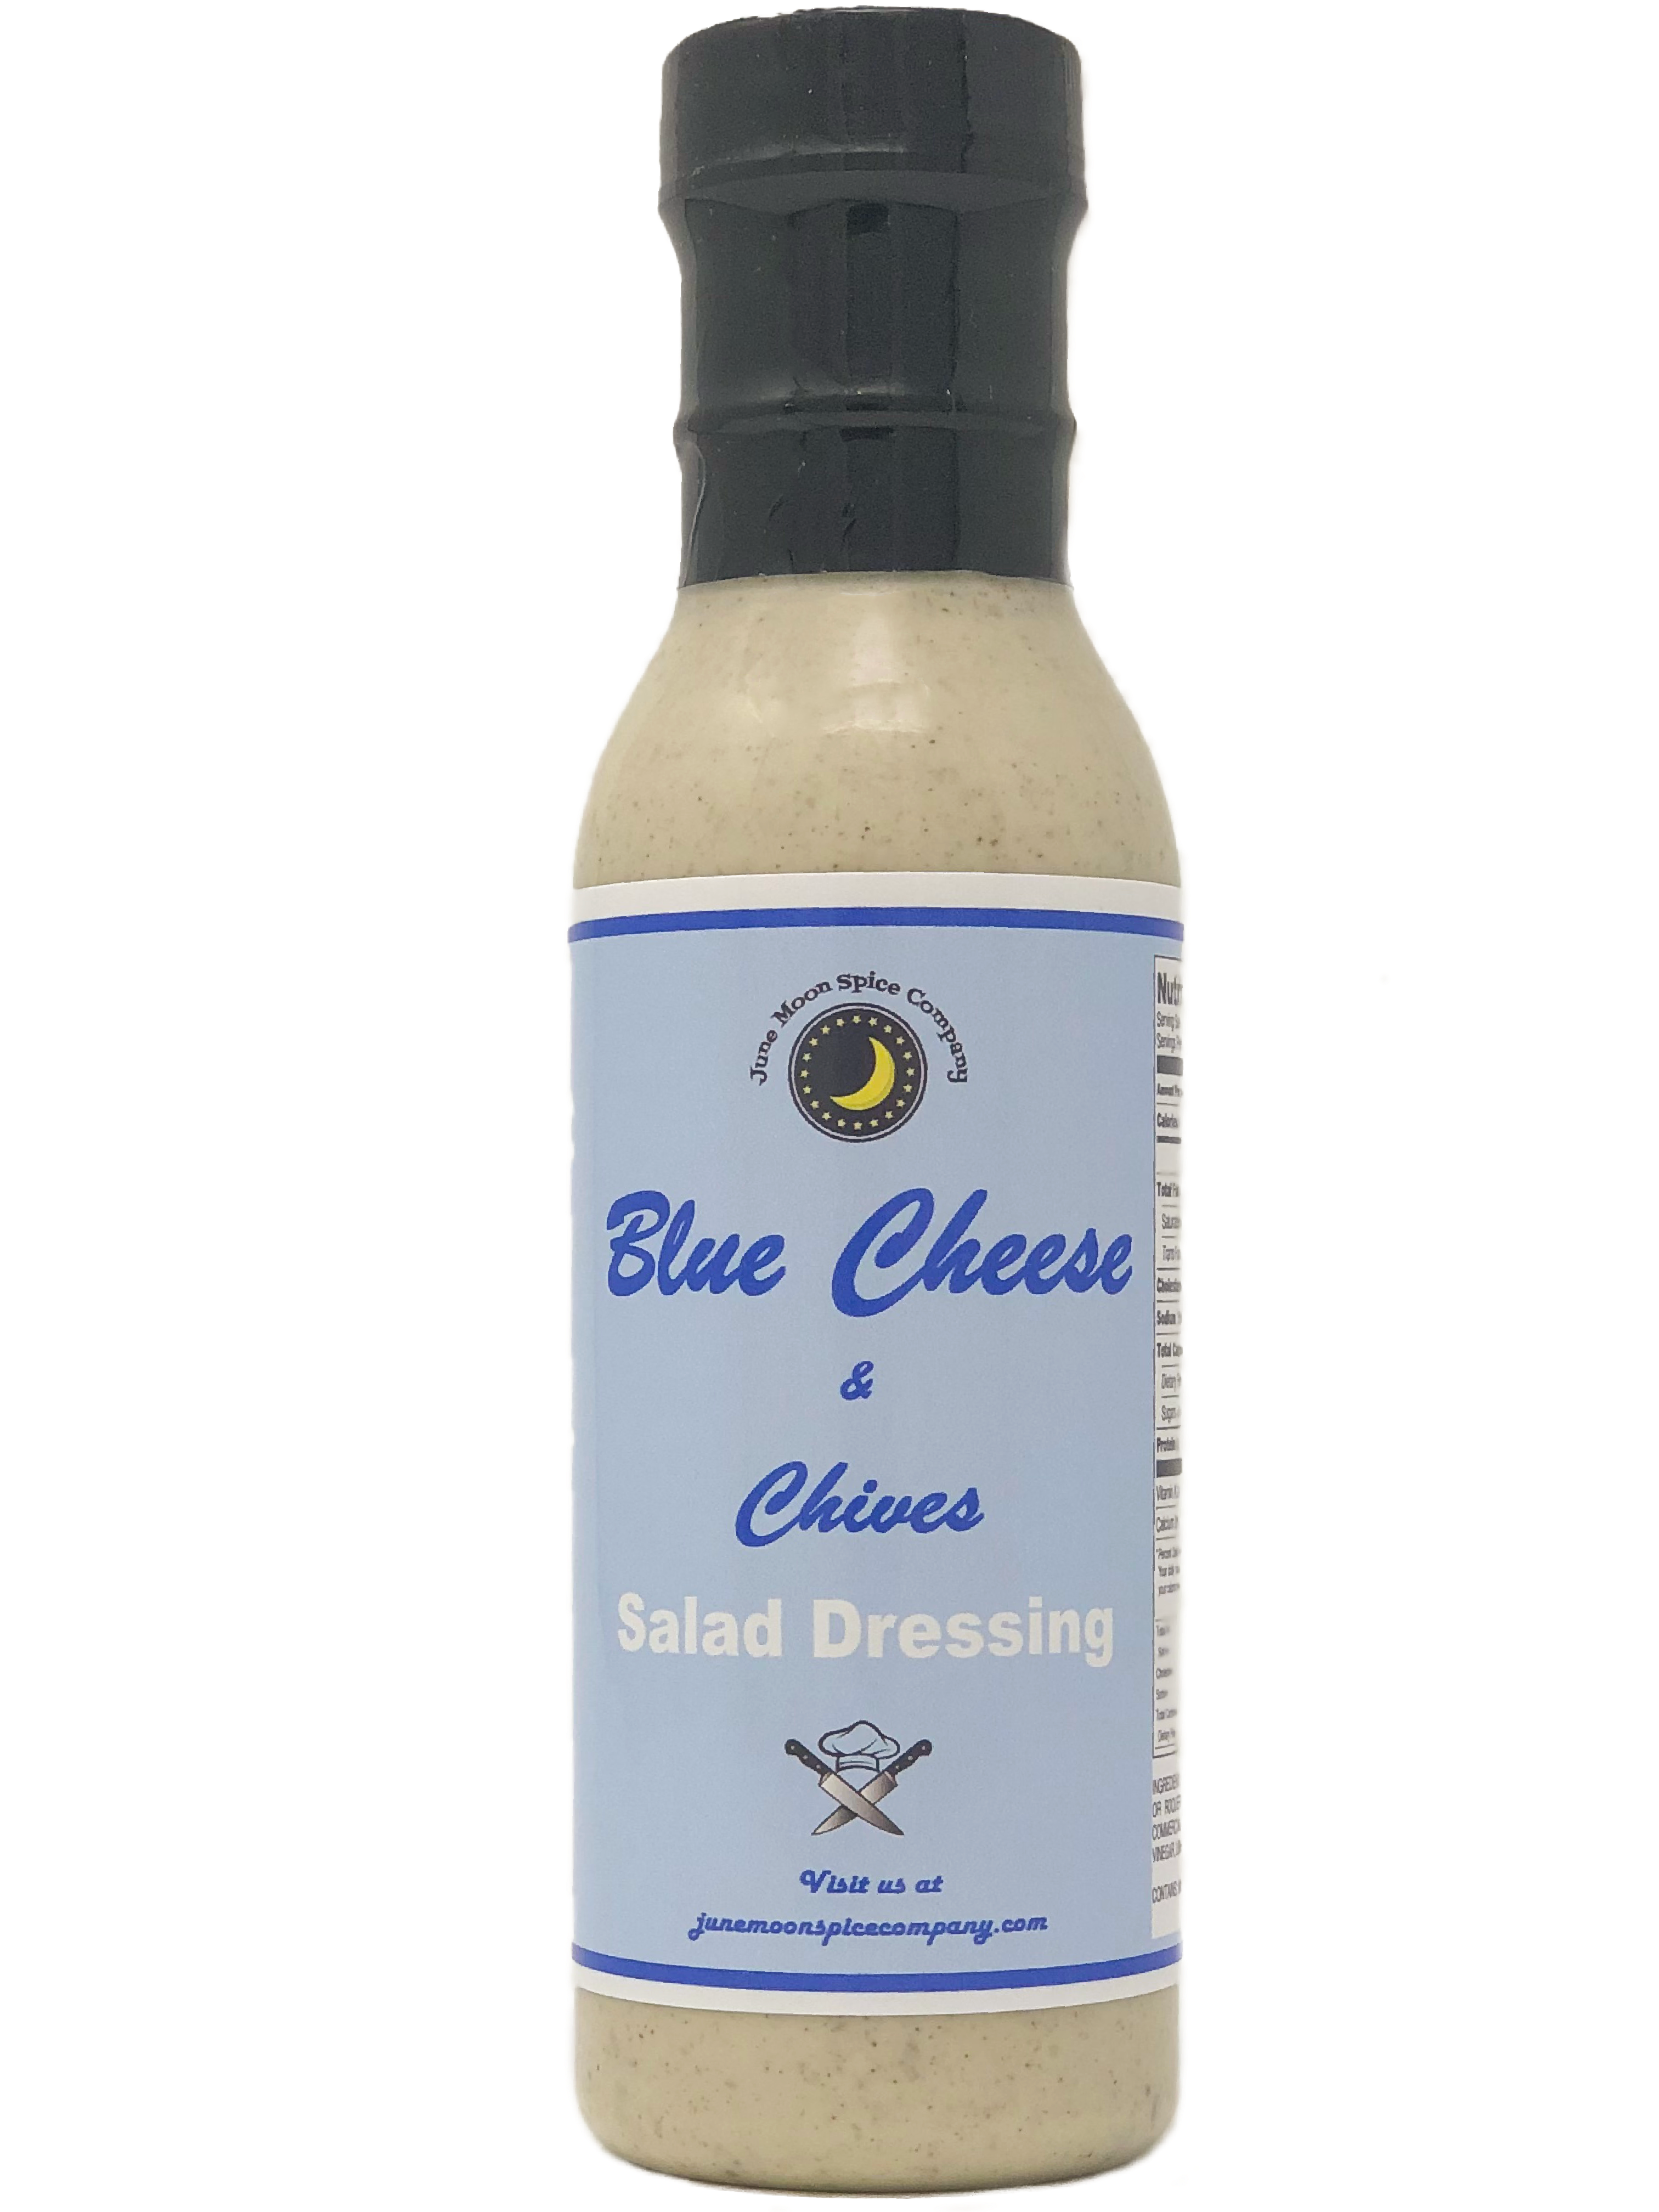 Blue Cheese & Chive Salad Dressing